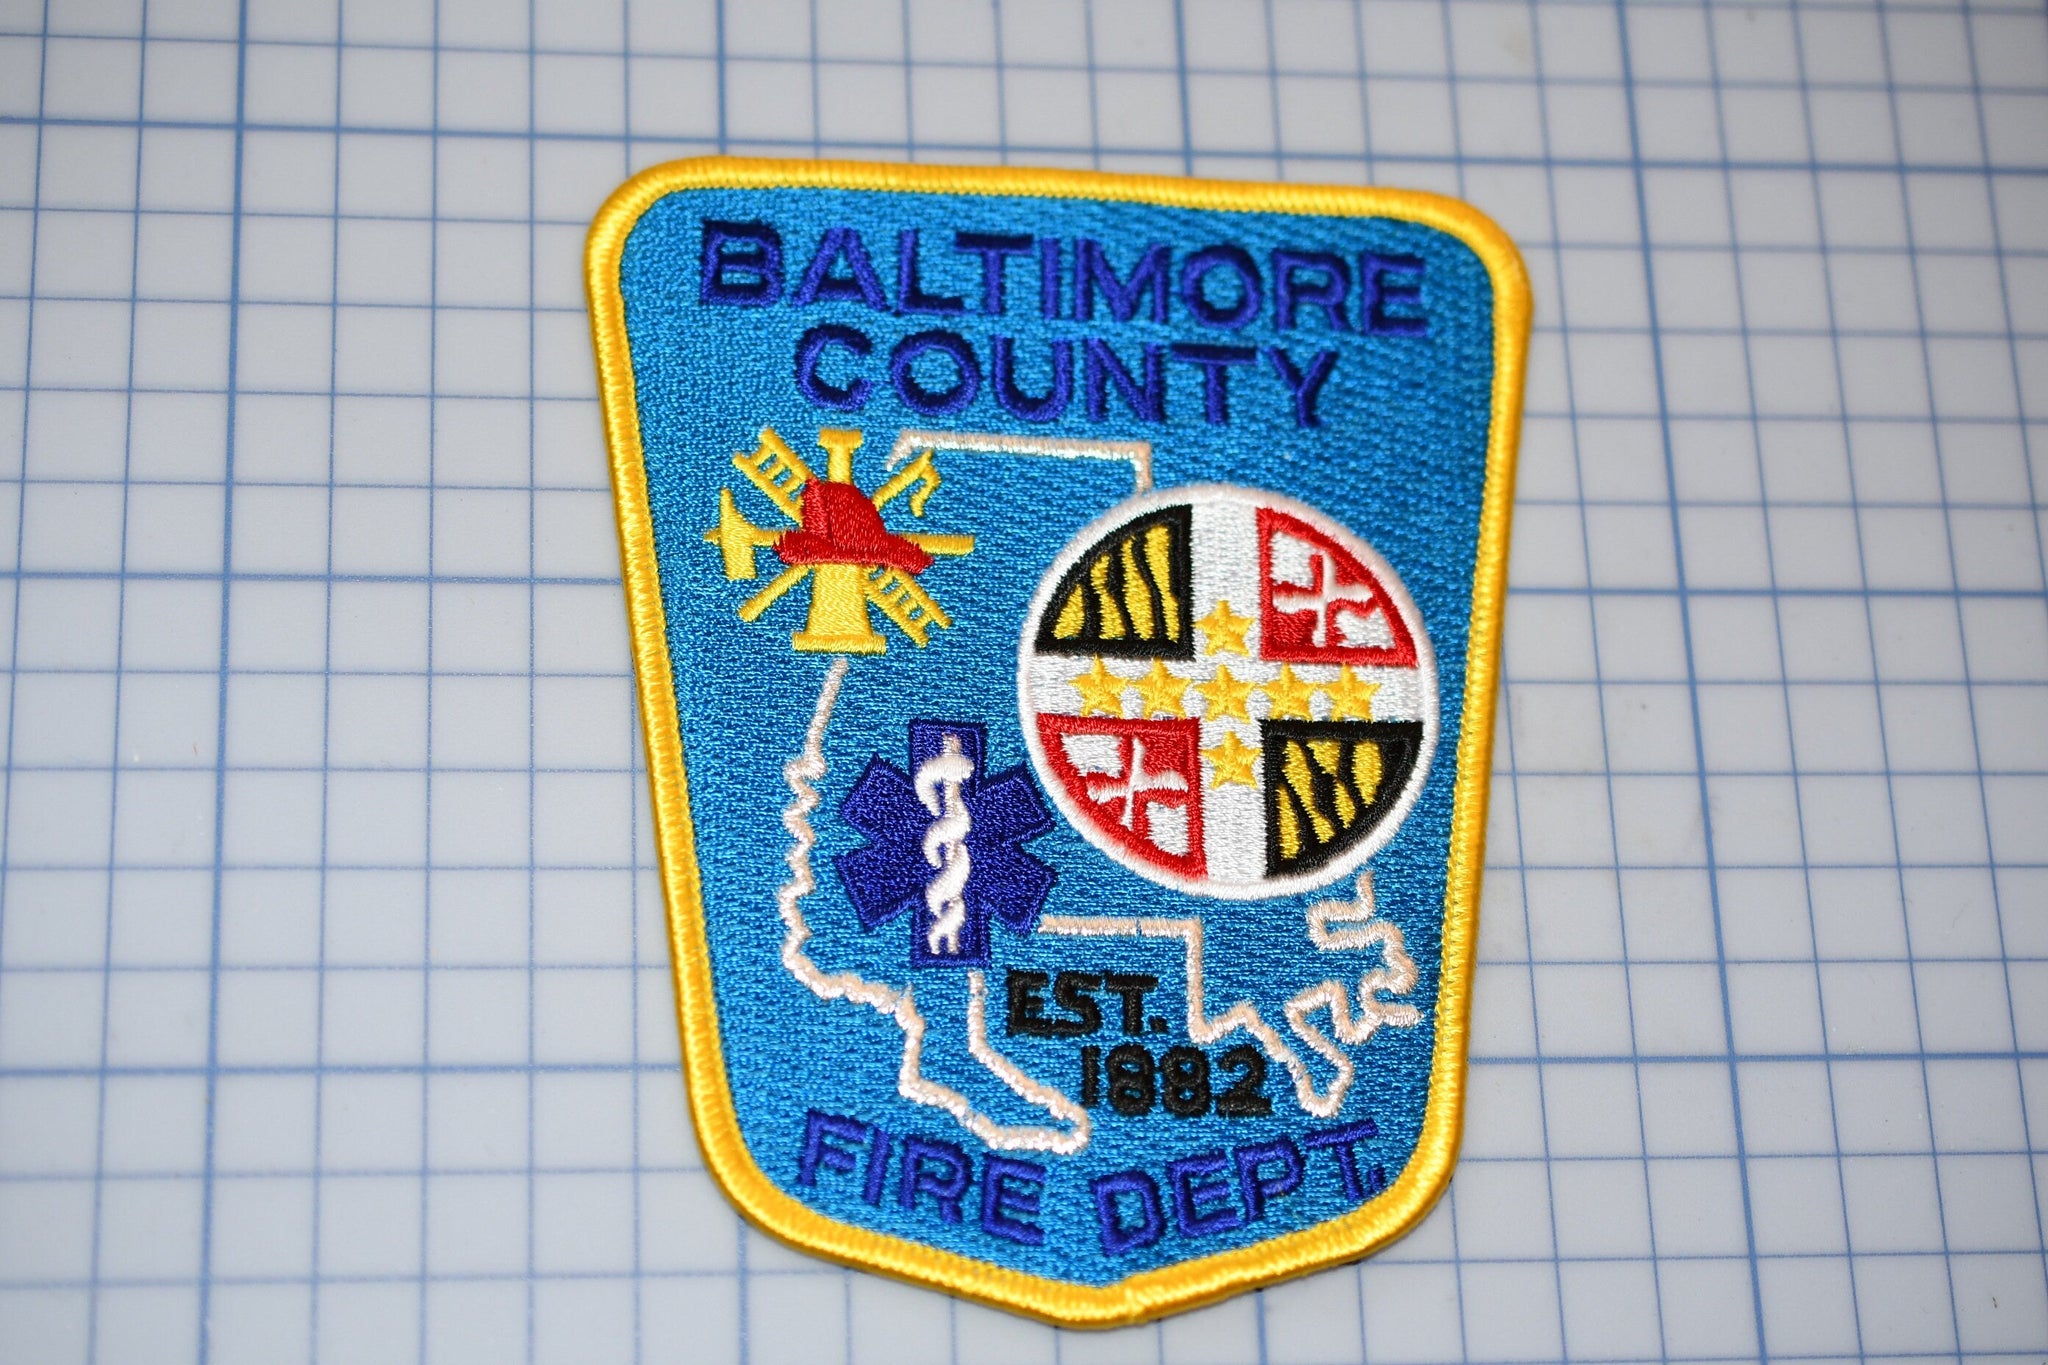 Baltimore County Maryland Fire Department Patch (S4-298)